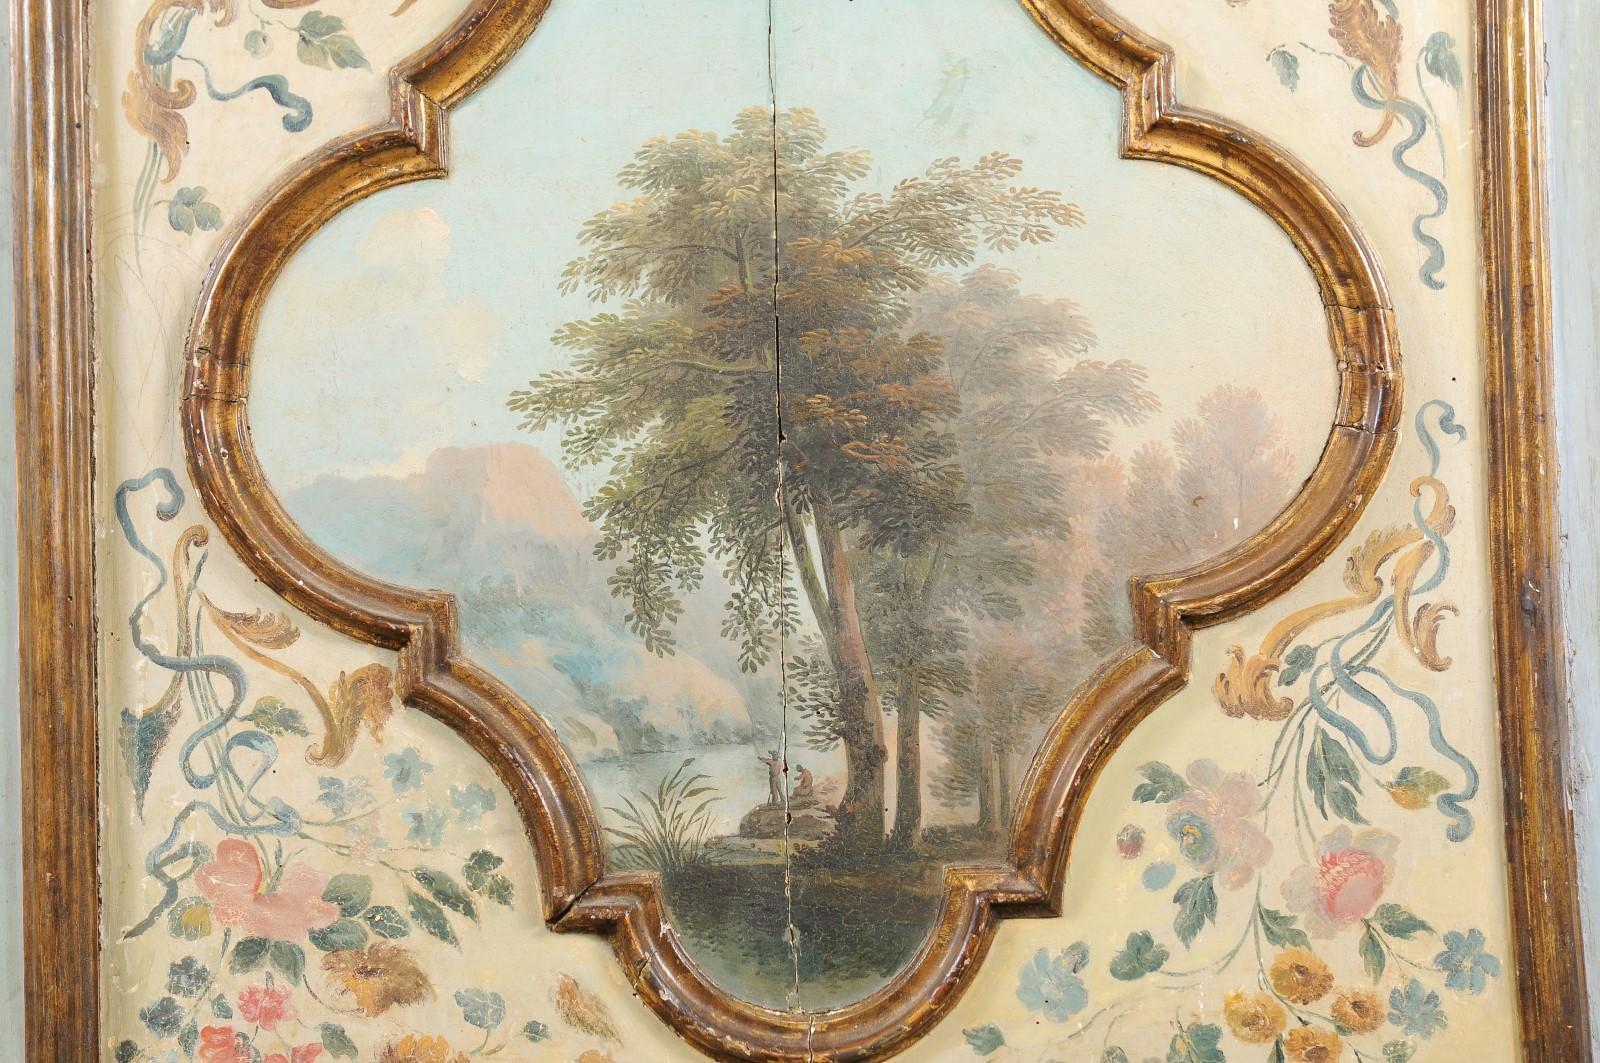 Italian 19th C. Pier Mirror w/ Serene Landscape Oil Painting at Top Panel For Sale 3